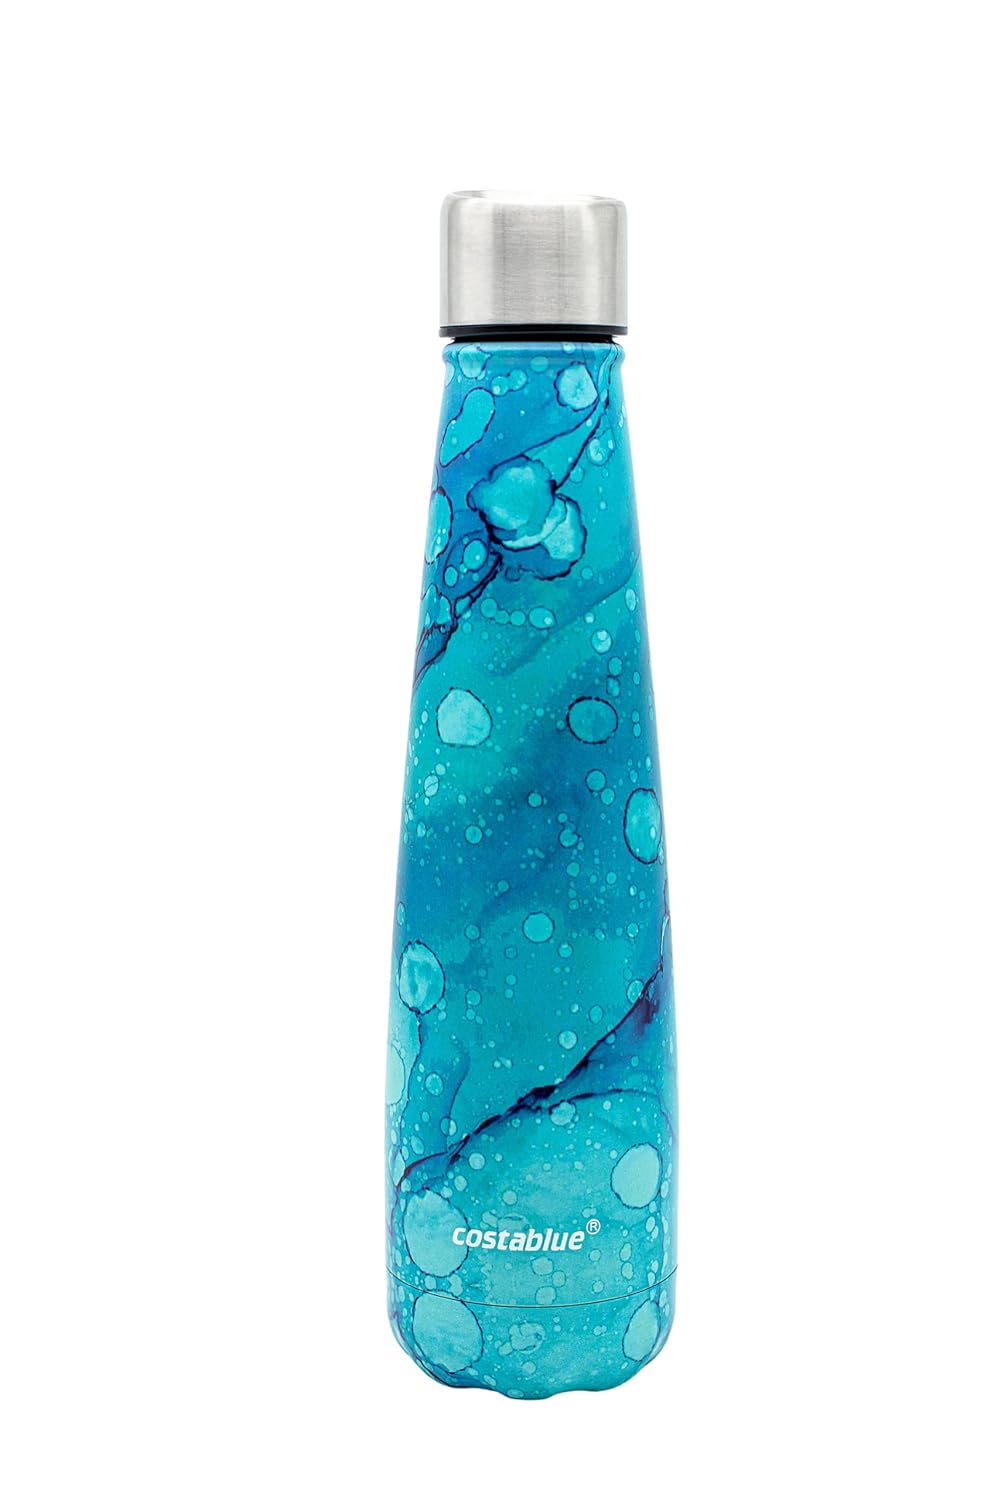 costablue Beverly Hills Collection Stainless Steel Water Bottle - BPA-Free Insulated Double Wall Bottle with Dishwasher-Safe Push-Lock-Open-Close Lid - 17 oz